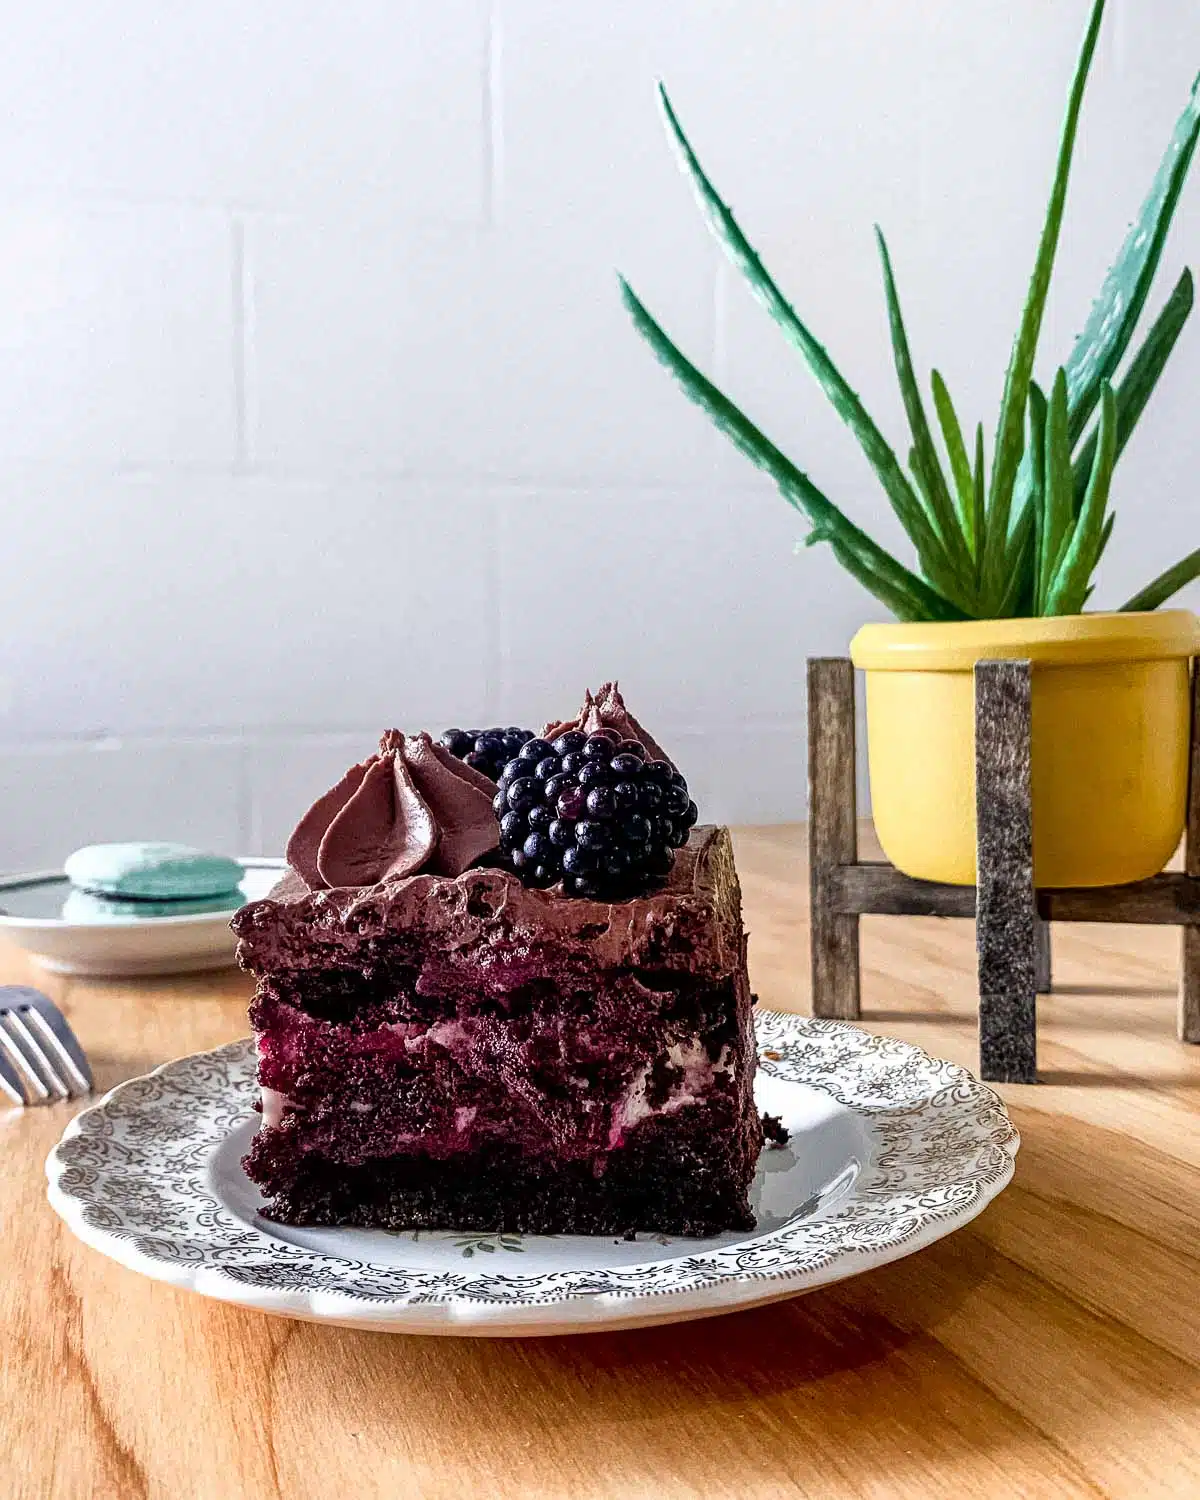 Vegan black forest cake from Fern Cafe and Bakery, Victoria BC.